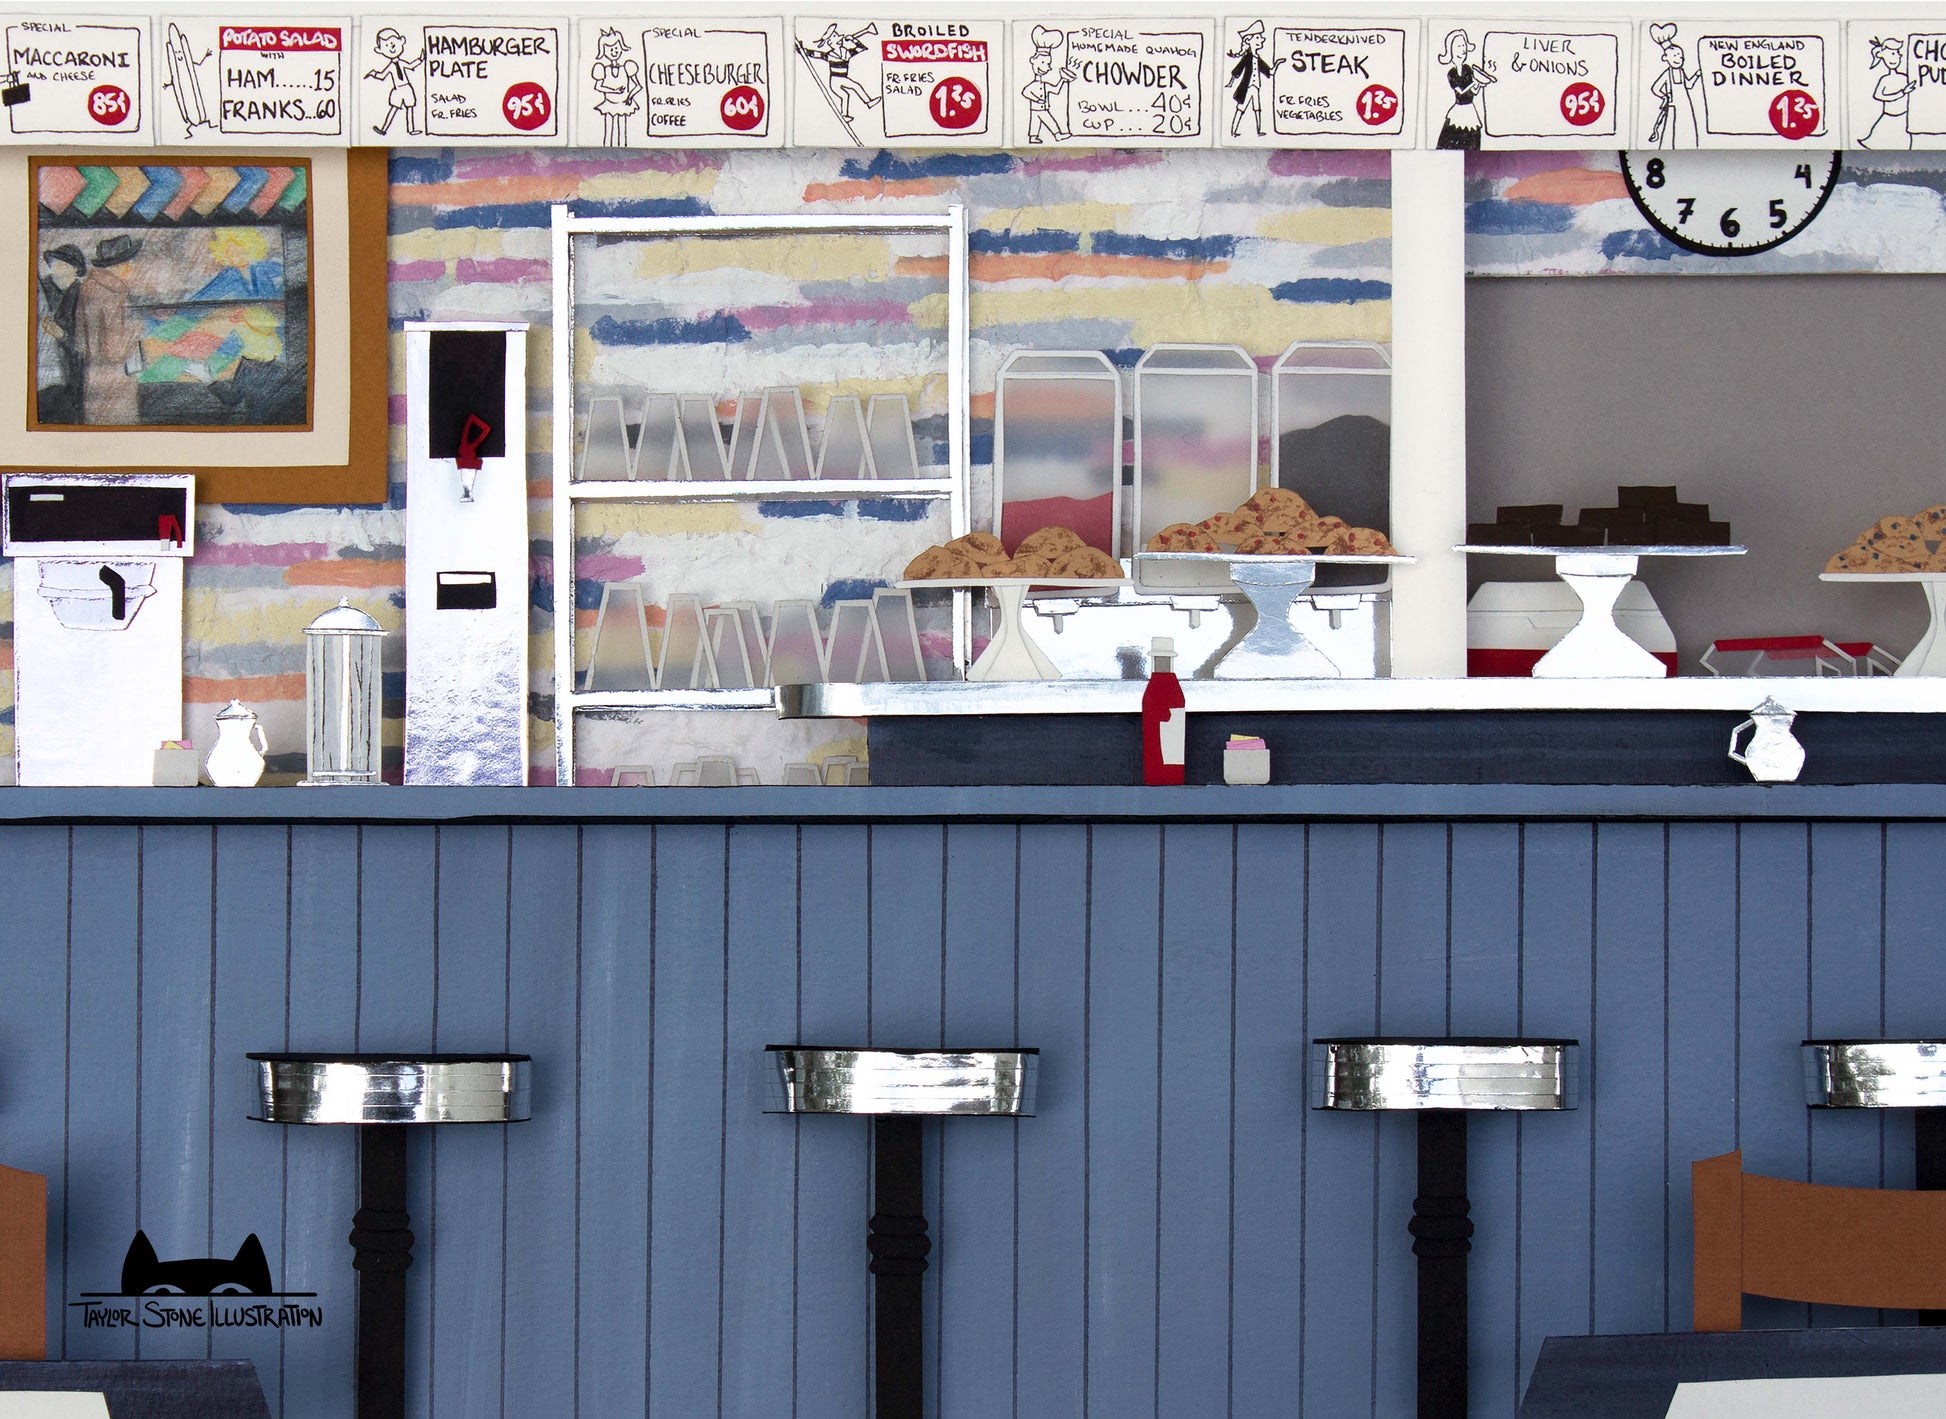 Cute jigsaw puzzle of cut paper illustration of the counter at the ArtCliff Diner in Vineyard Haven, Martha's Vineyard